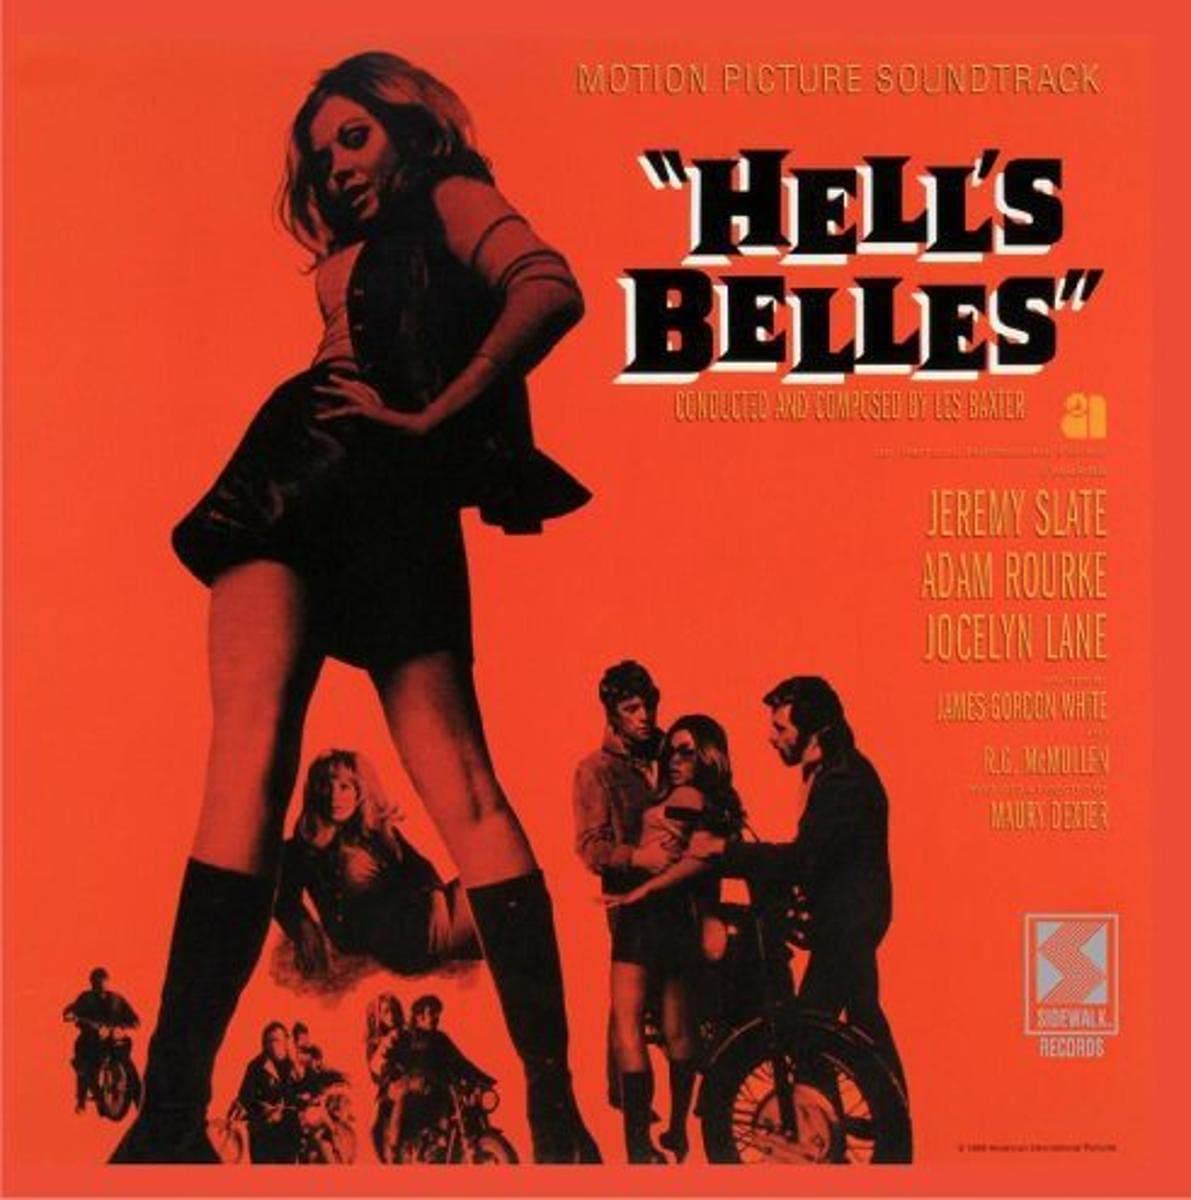 HELL'S BELLS: Motion Picture Soundtrack LP